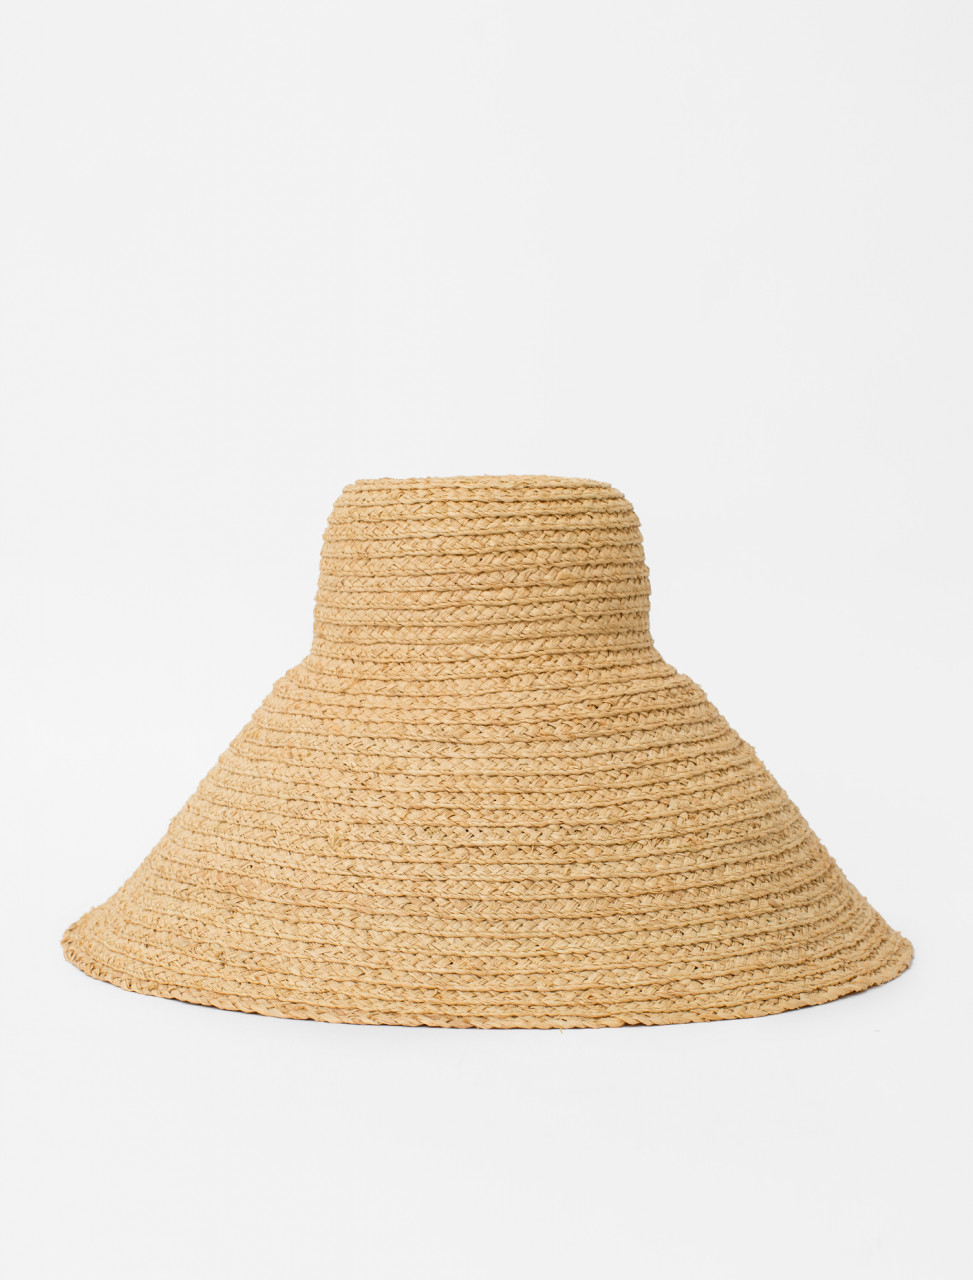 Jacquemus Le Chapeau Valensole | Voo Store Berlin | Worldwide Shipping